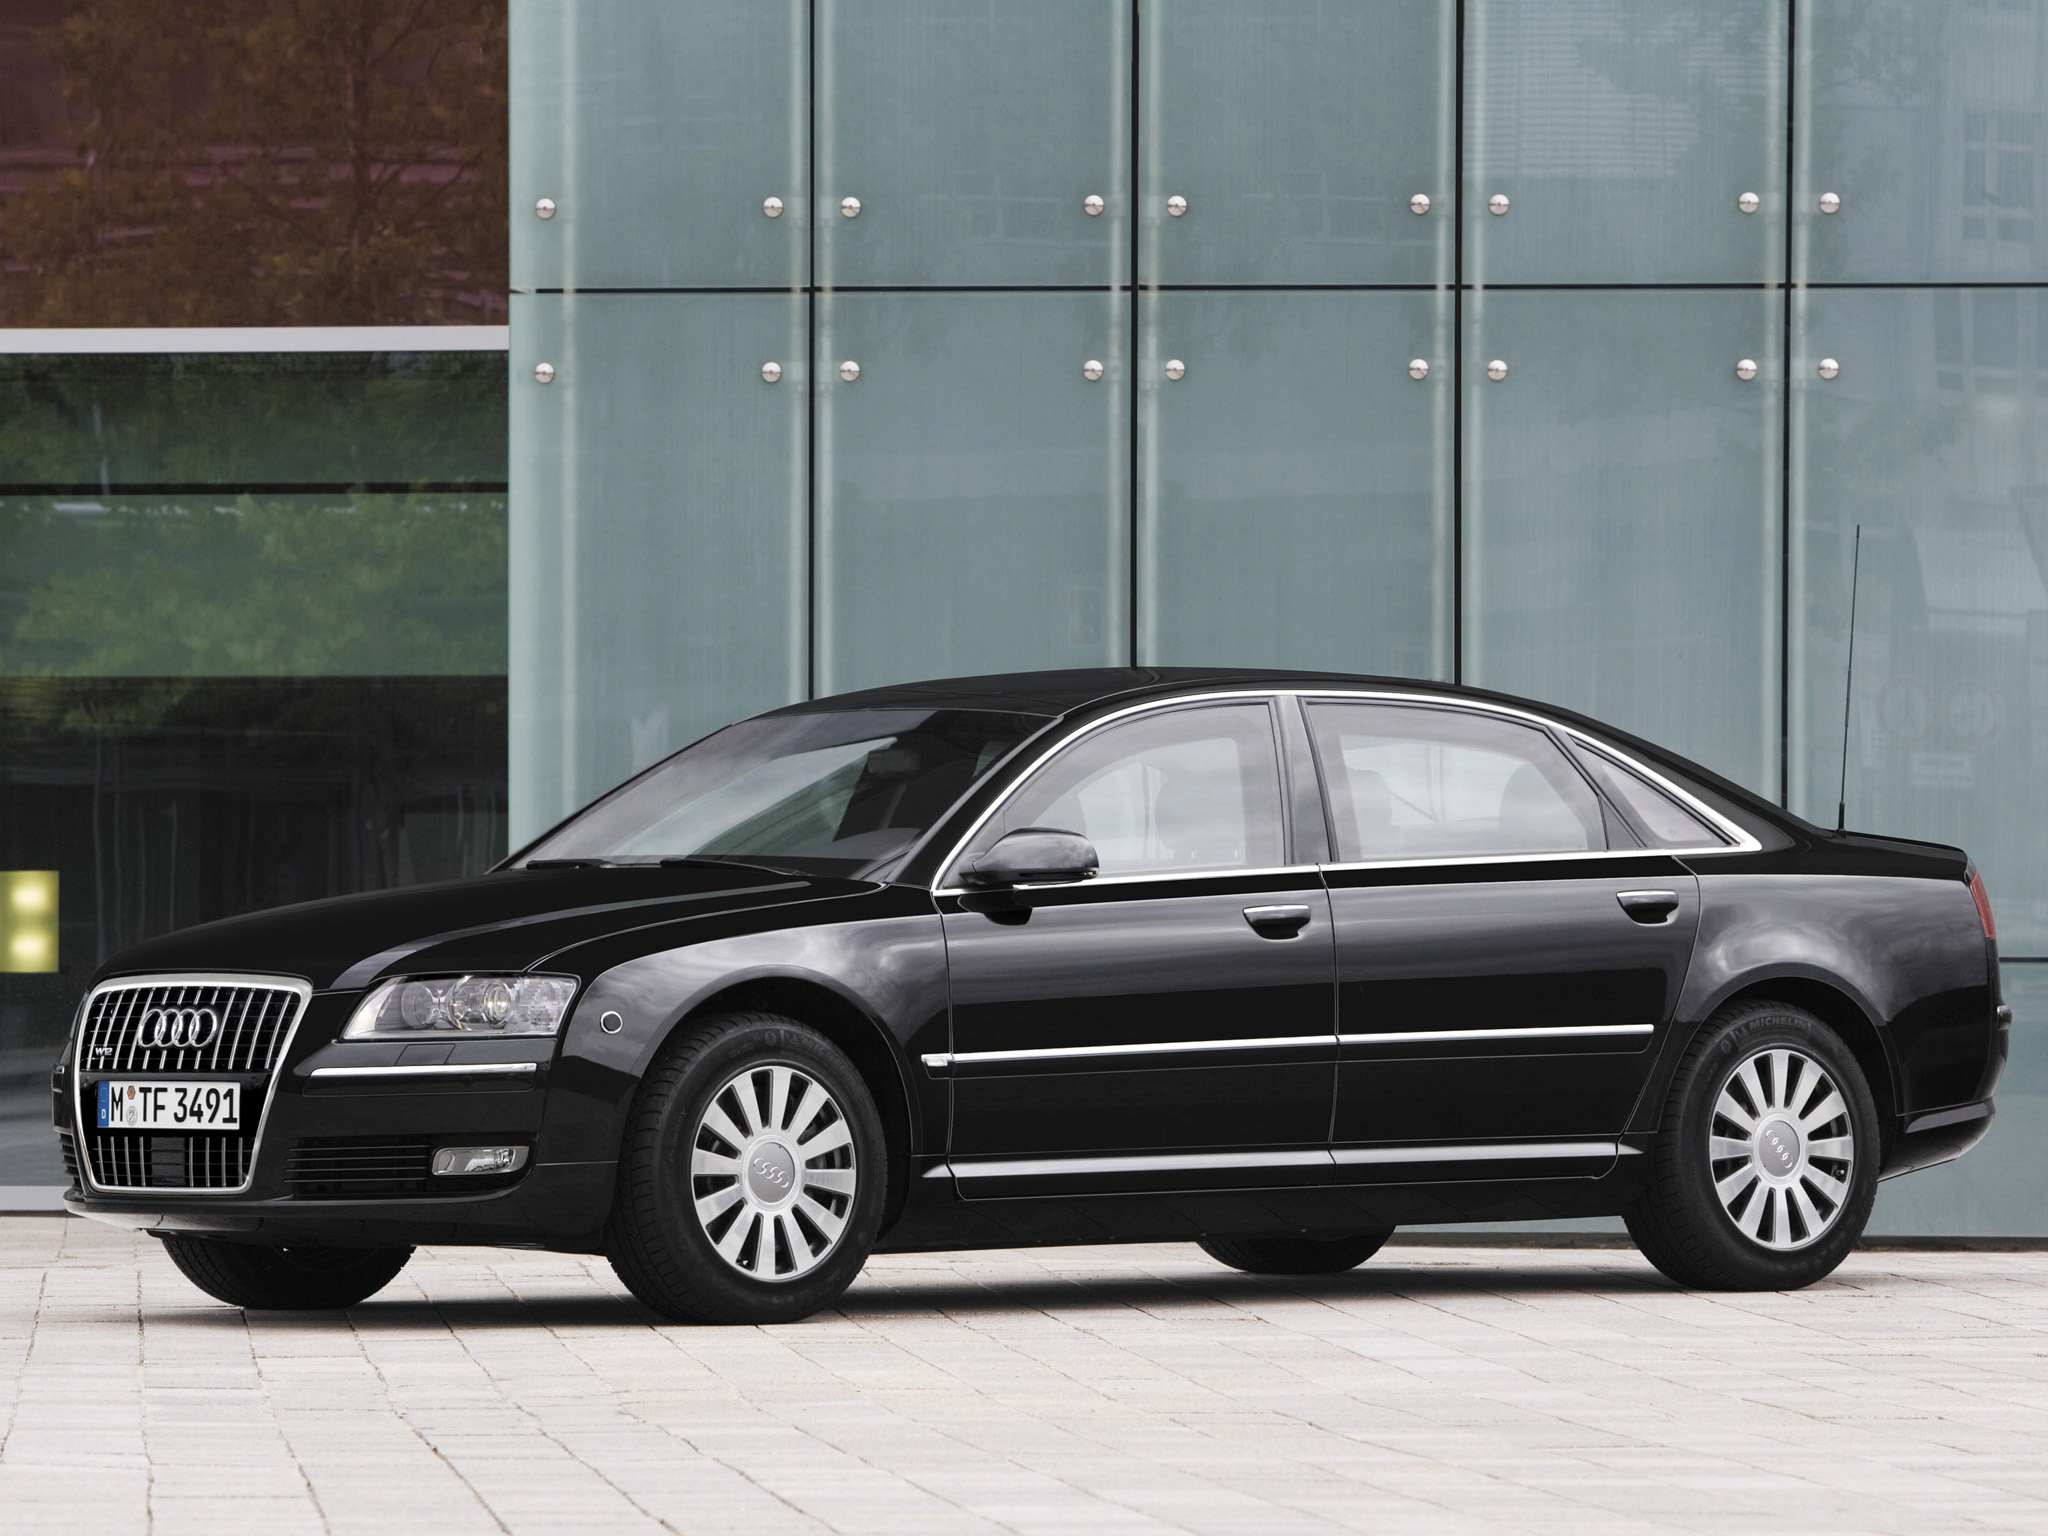 2008, Armored, Audi, A8l, W12, Security, D 3, Police Wallpaper